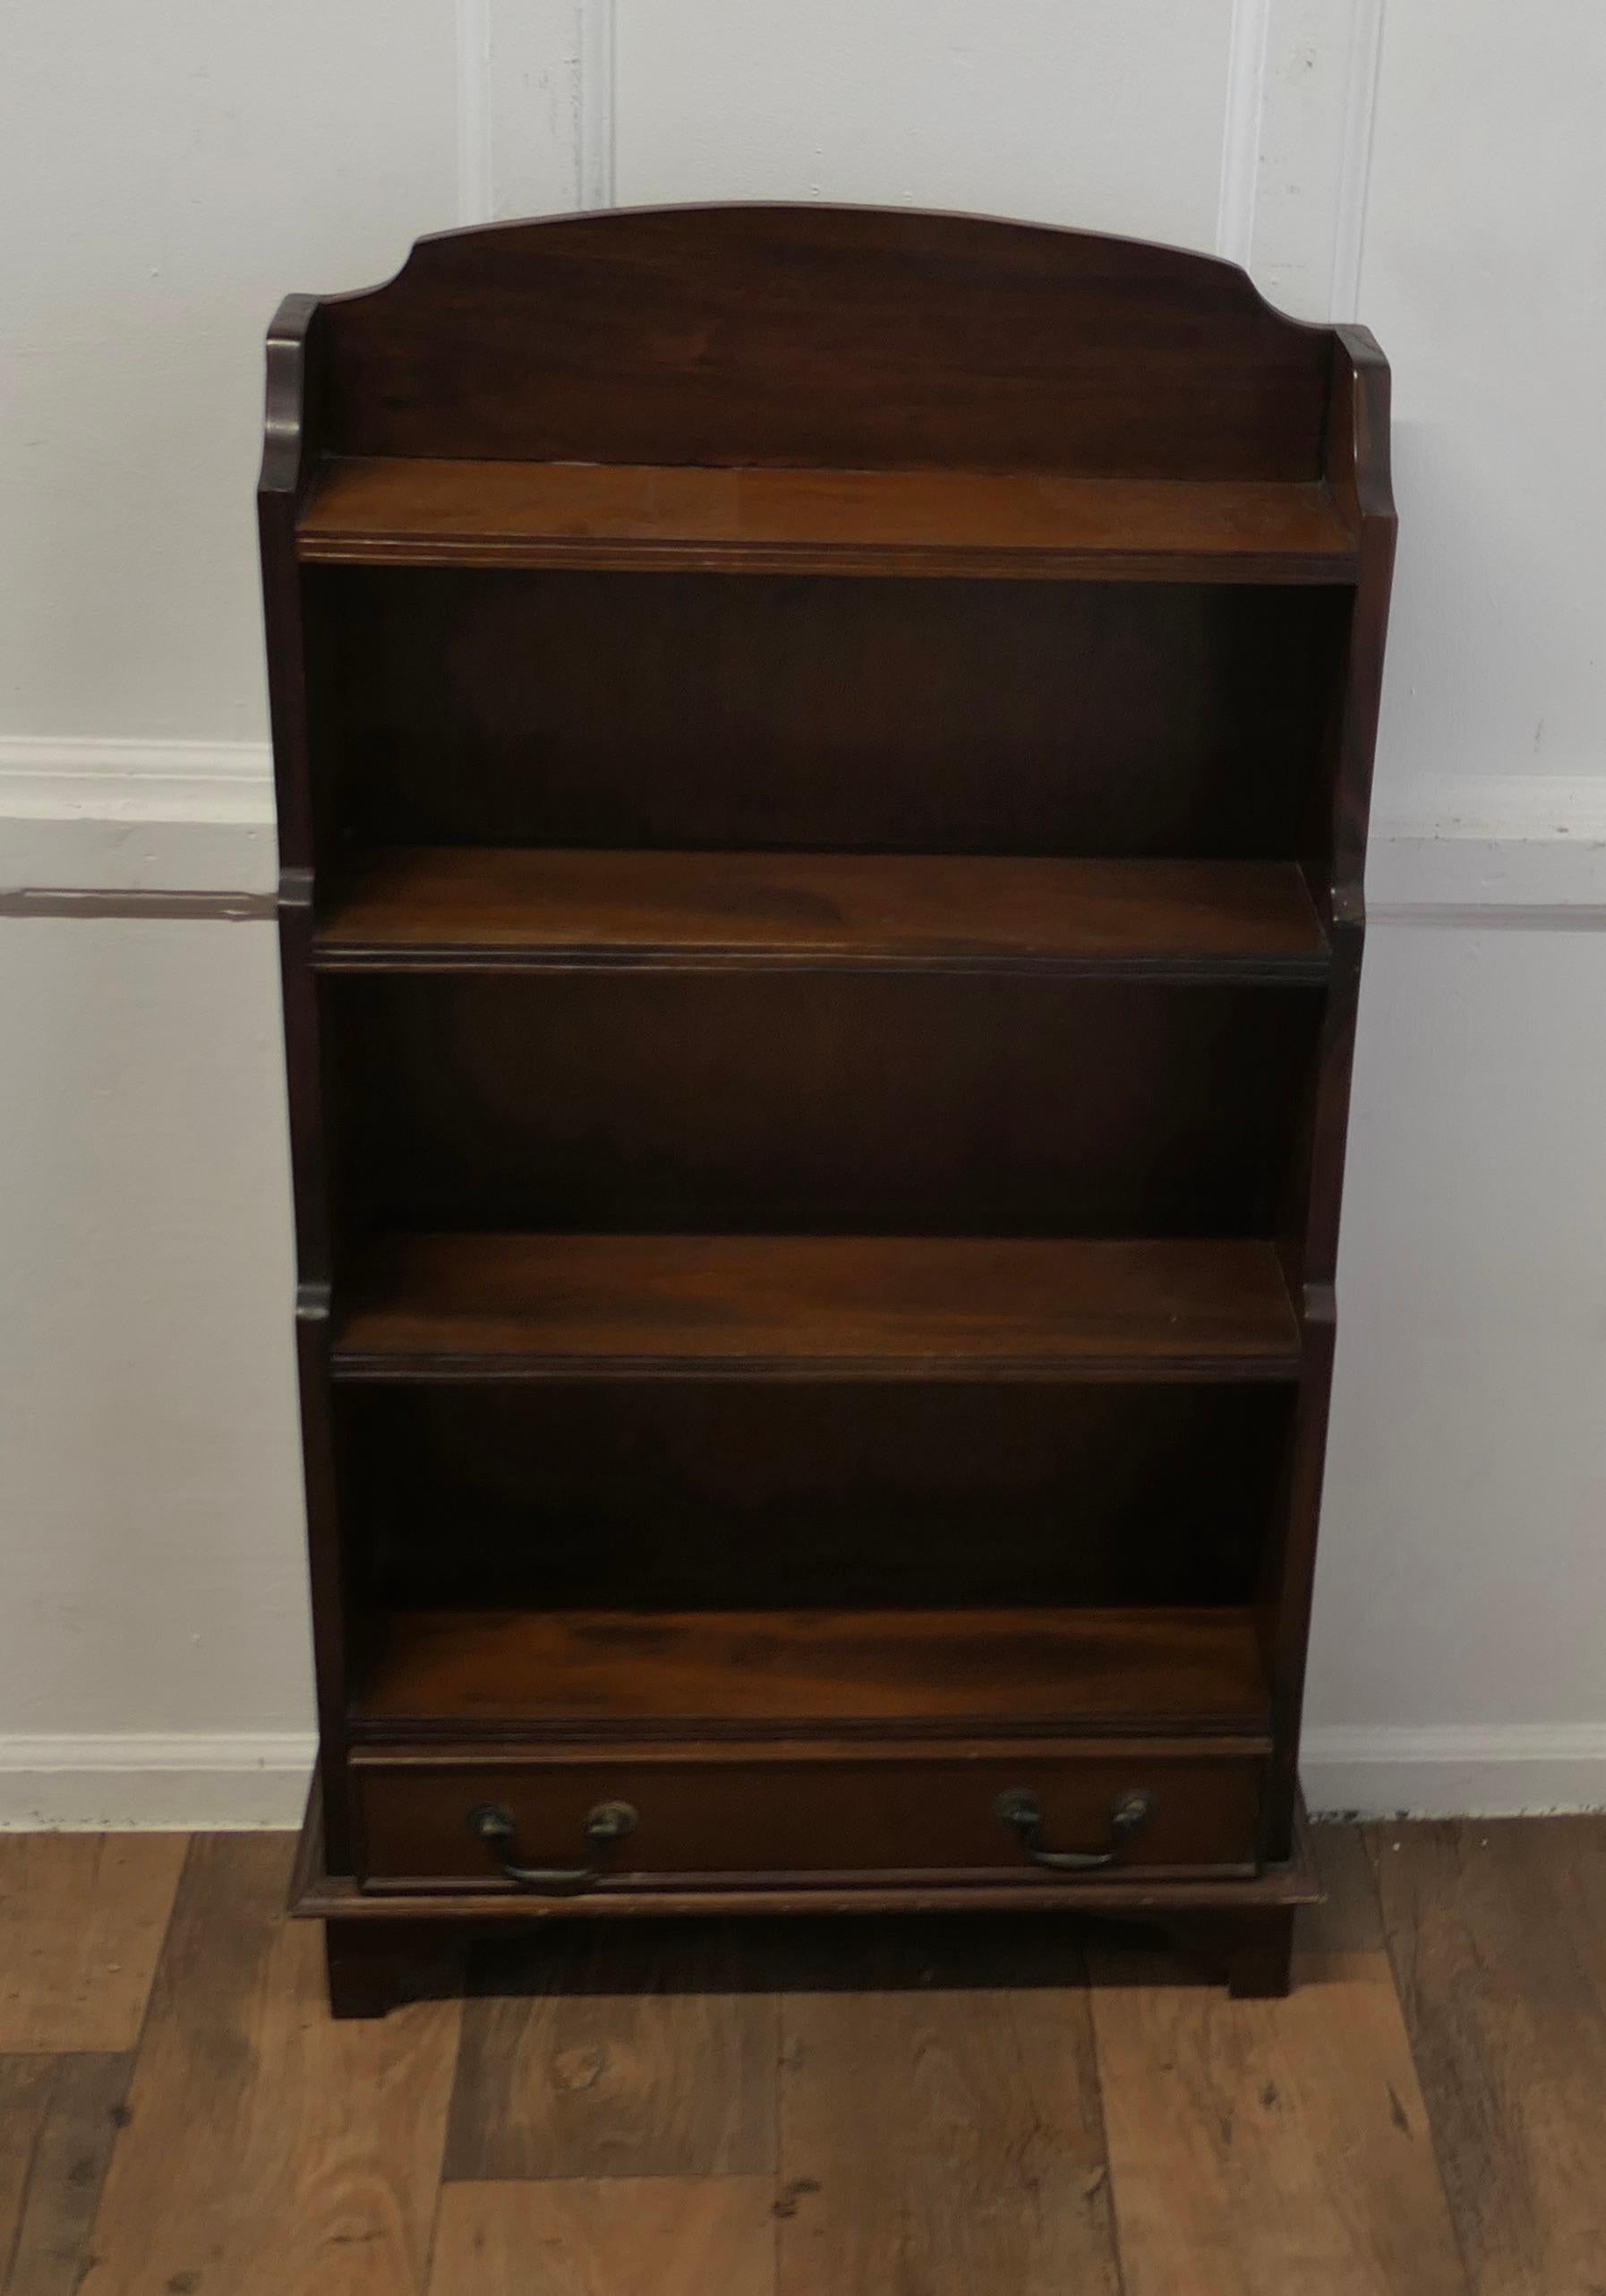 Art Deco Book Case with a Drawer at the Bottom In Good Condition For Sale In Chillerton, Isle of Wight